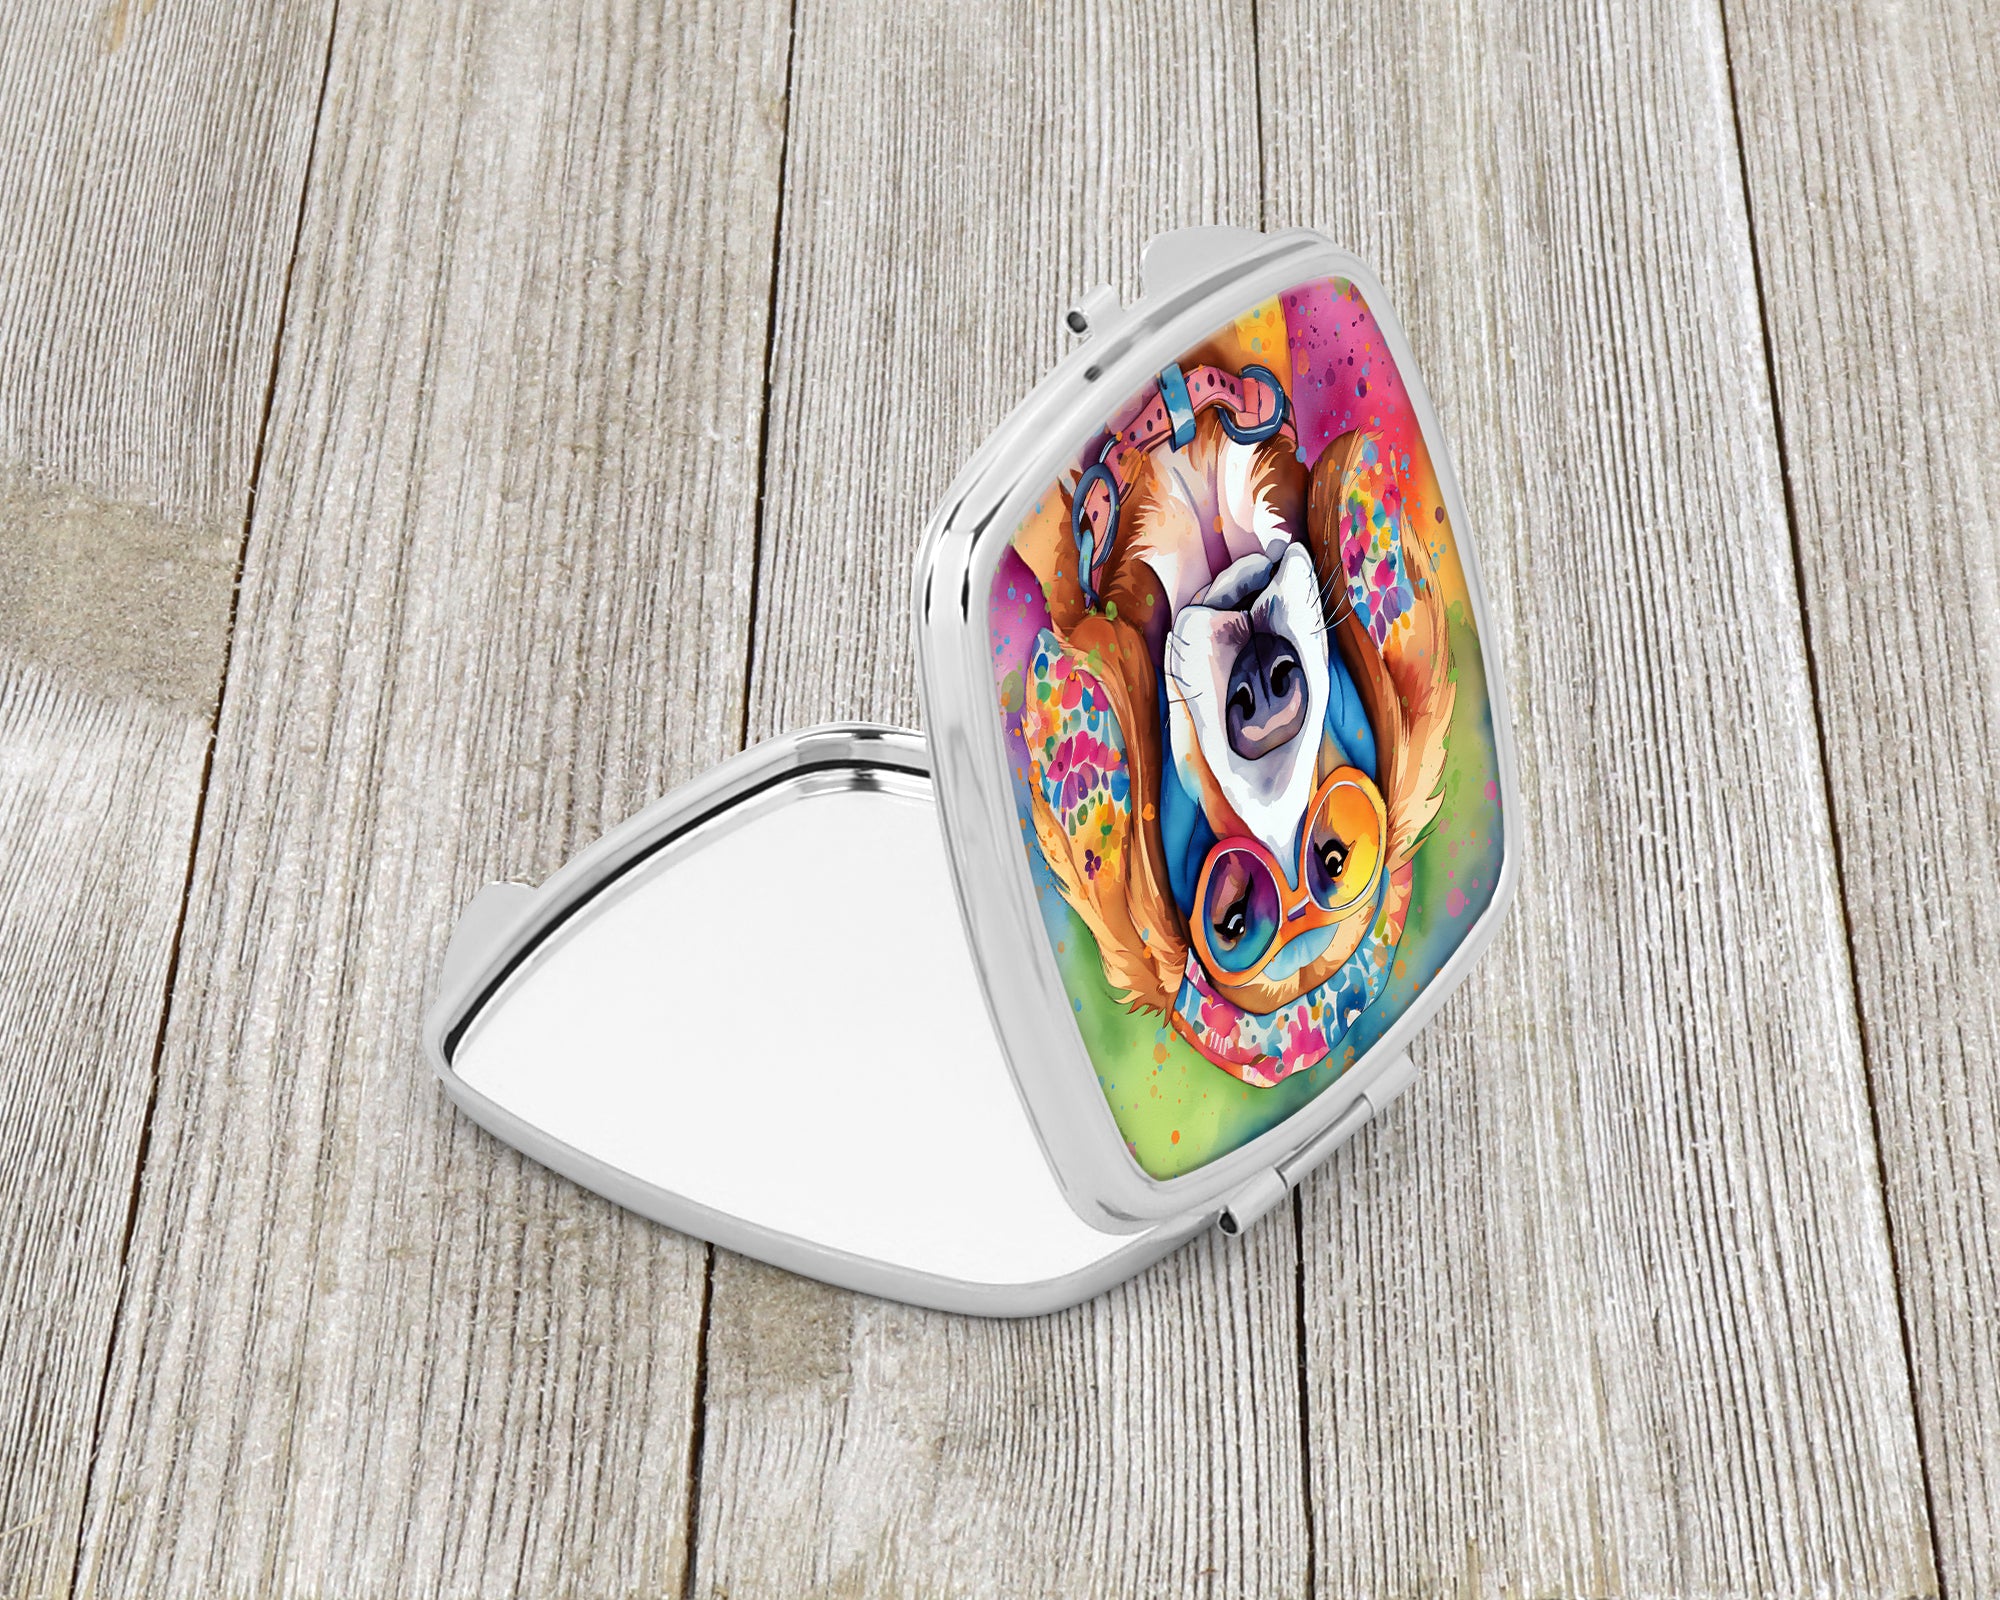 Buy this Hippie Dawg Compact Mirror